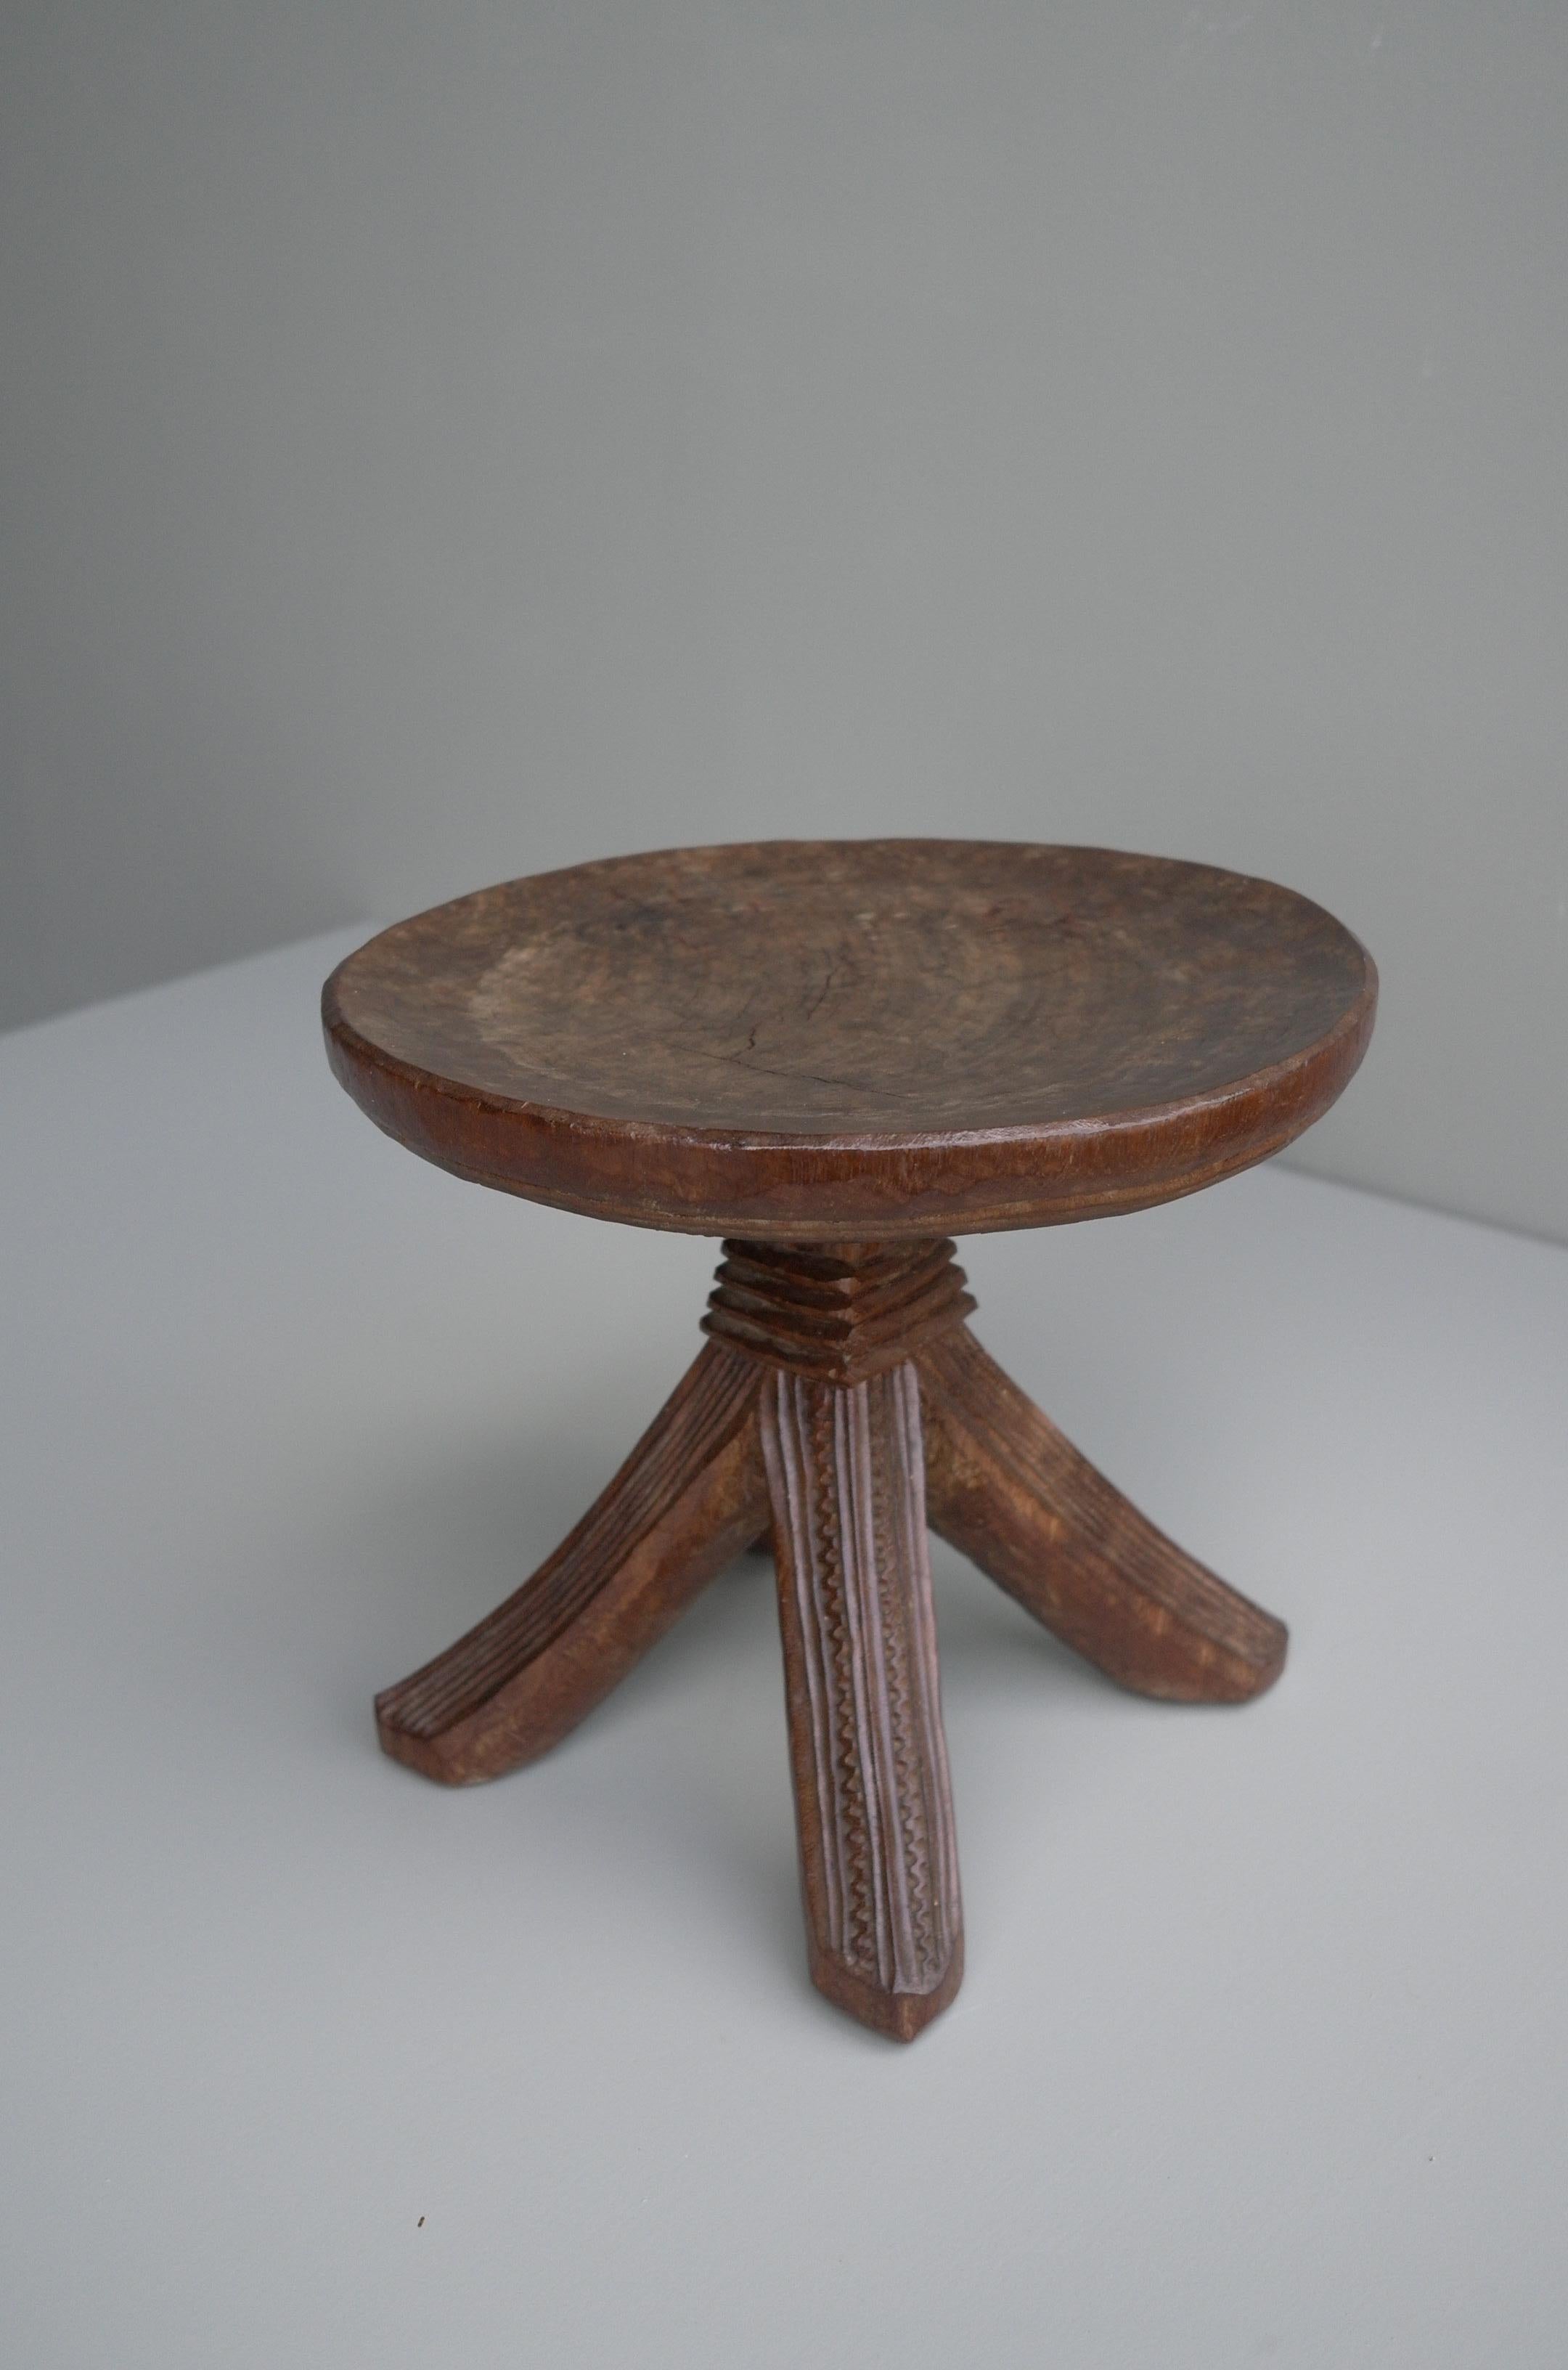 Hand-Carved Handcrafted African Tribal Art Craftsmanship Stool, Mid-Century Modern, 1950's For Sale